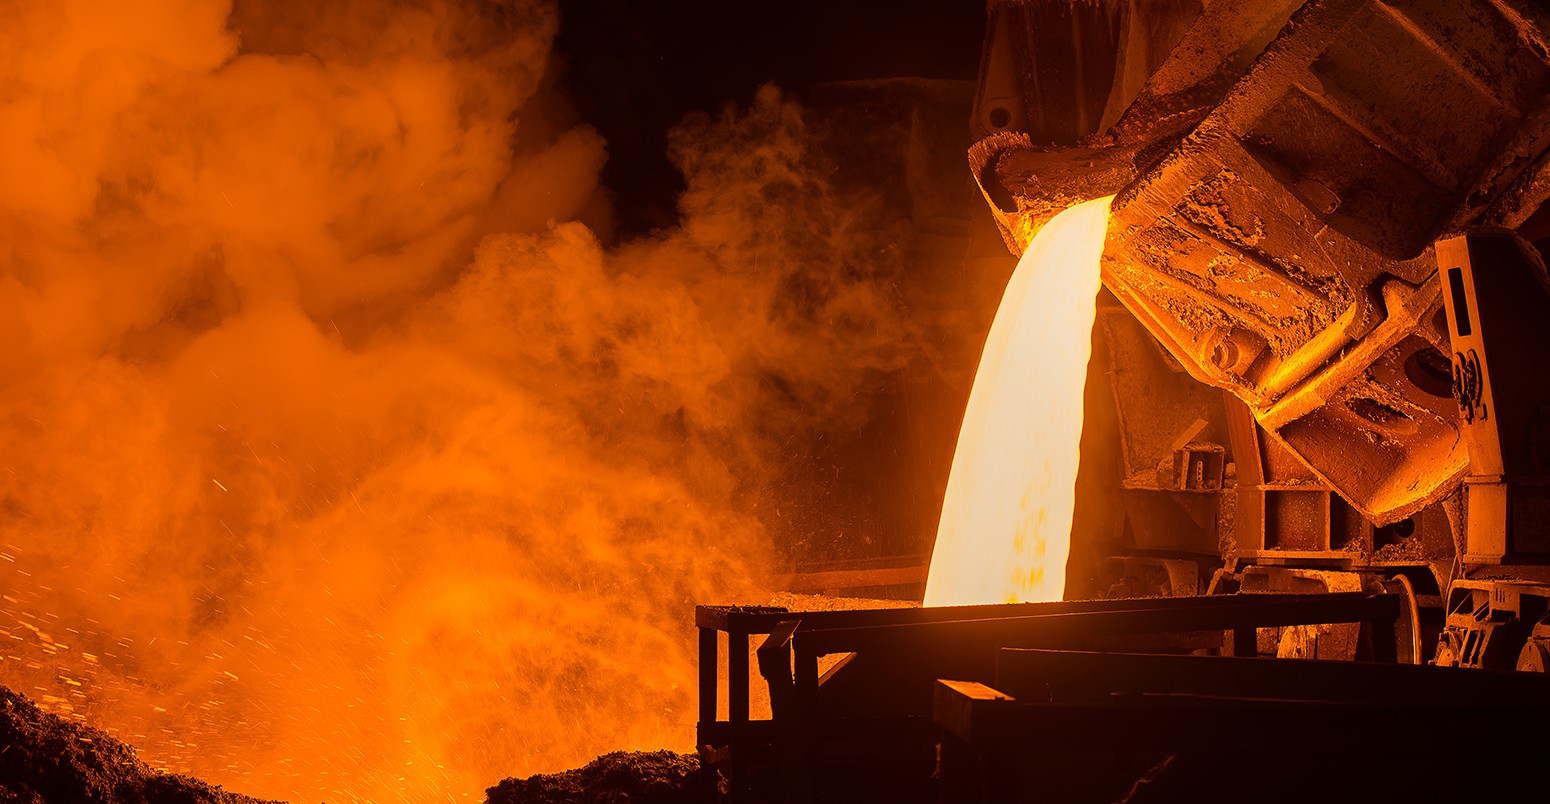 Hot steel being poured in a steel plant